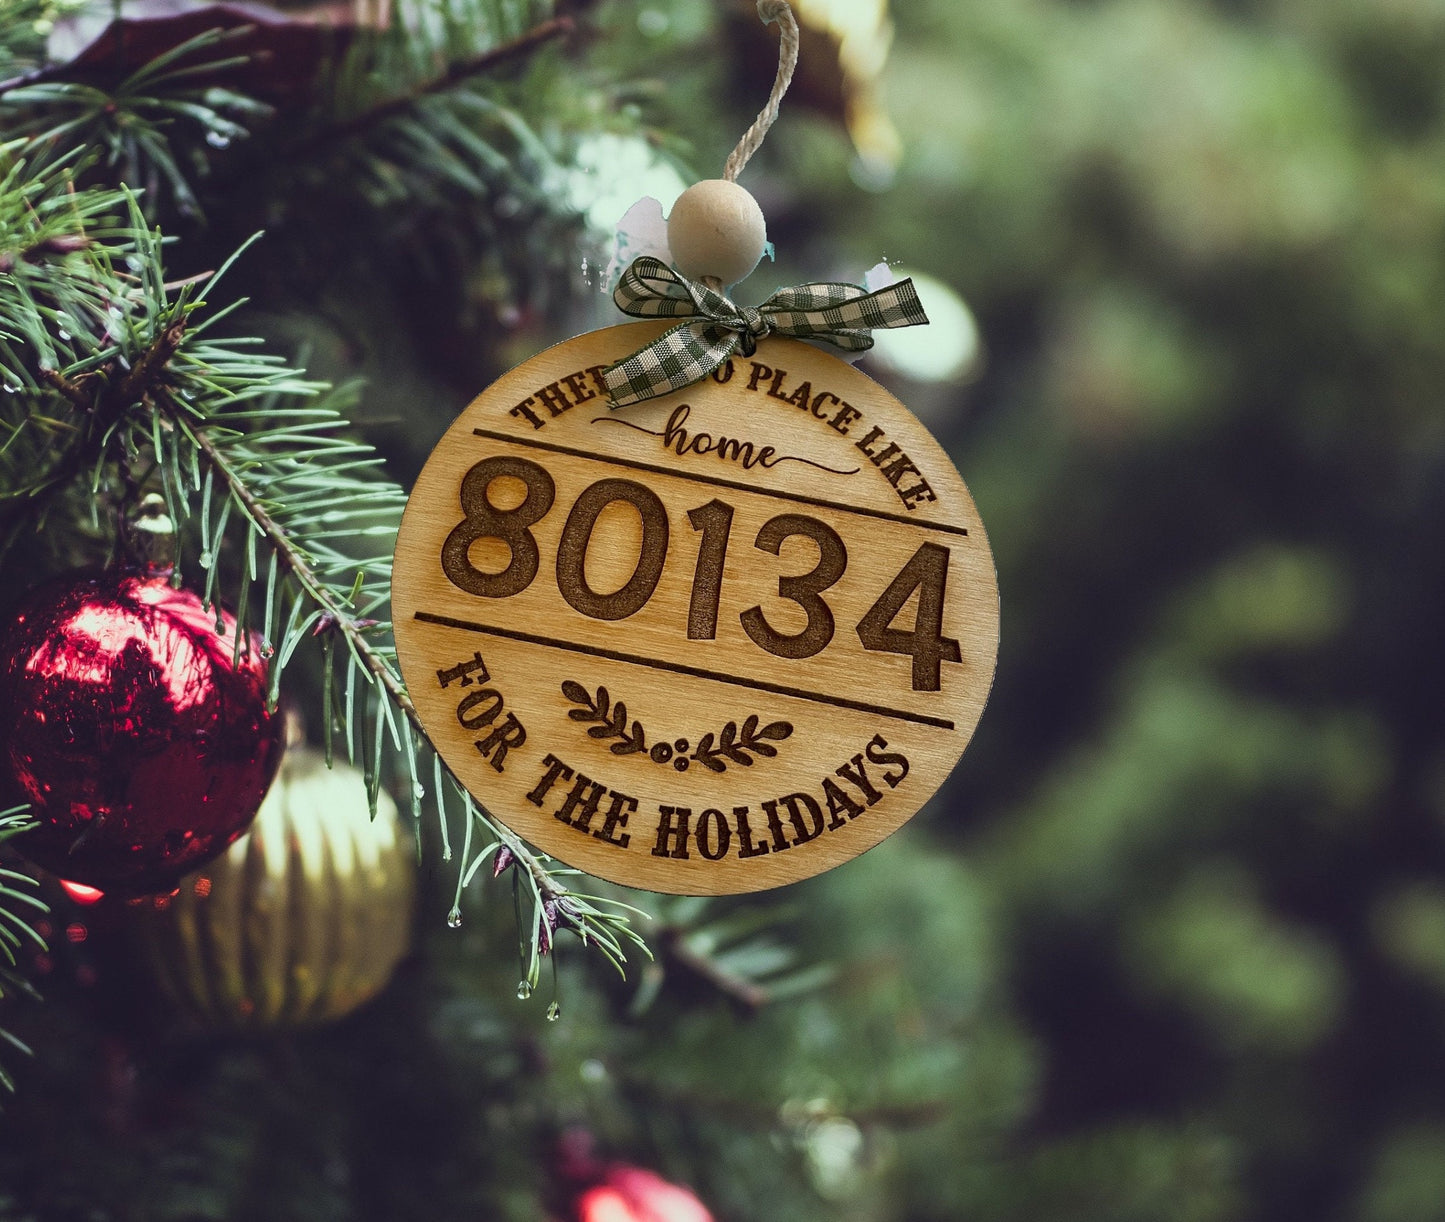 Zip code Holiday ornament